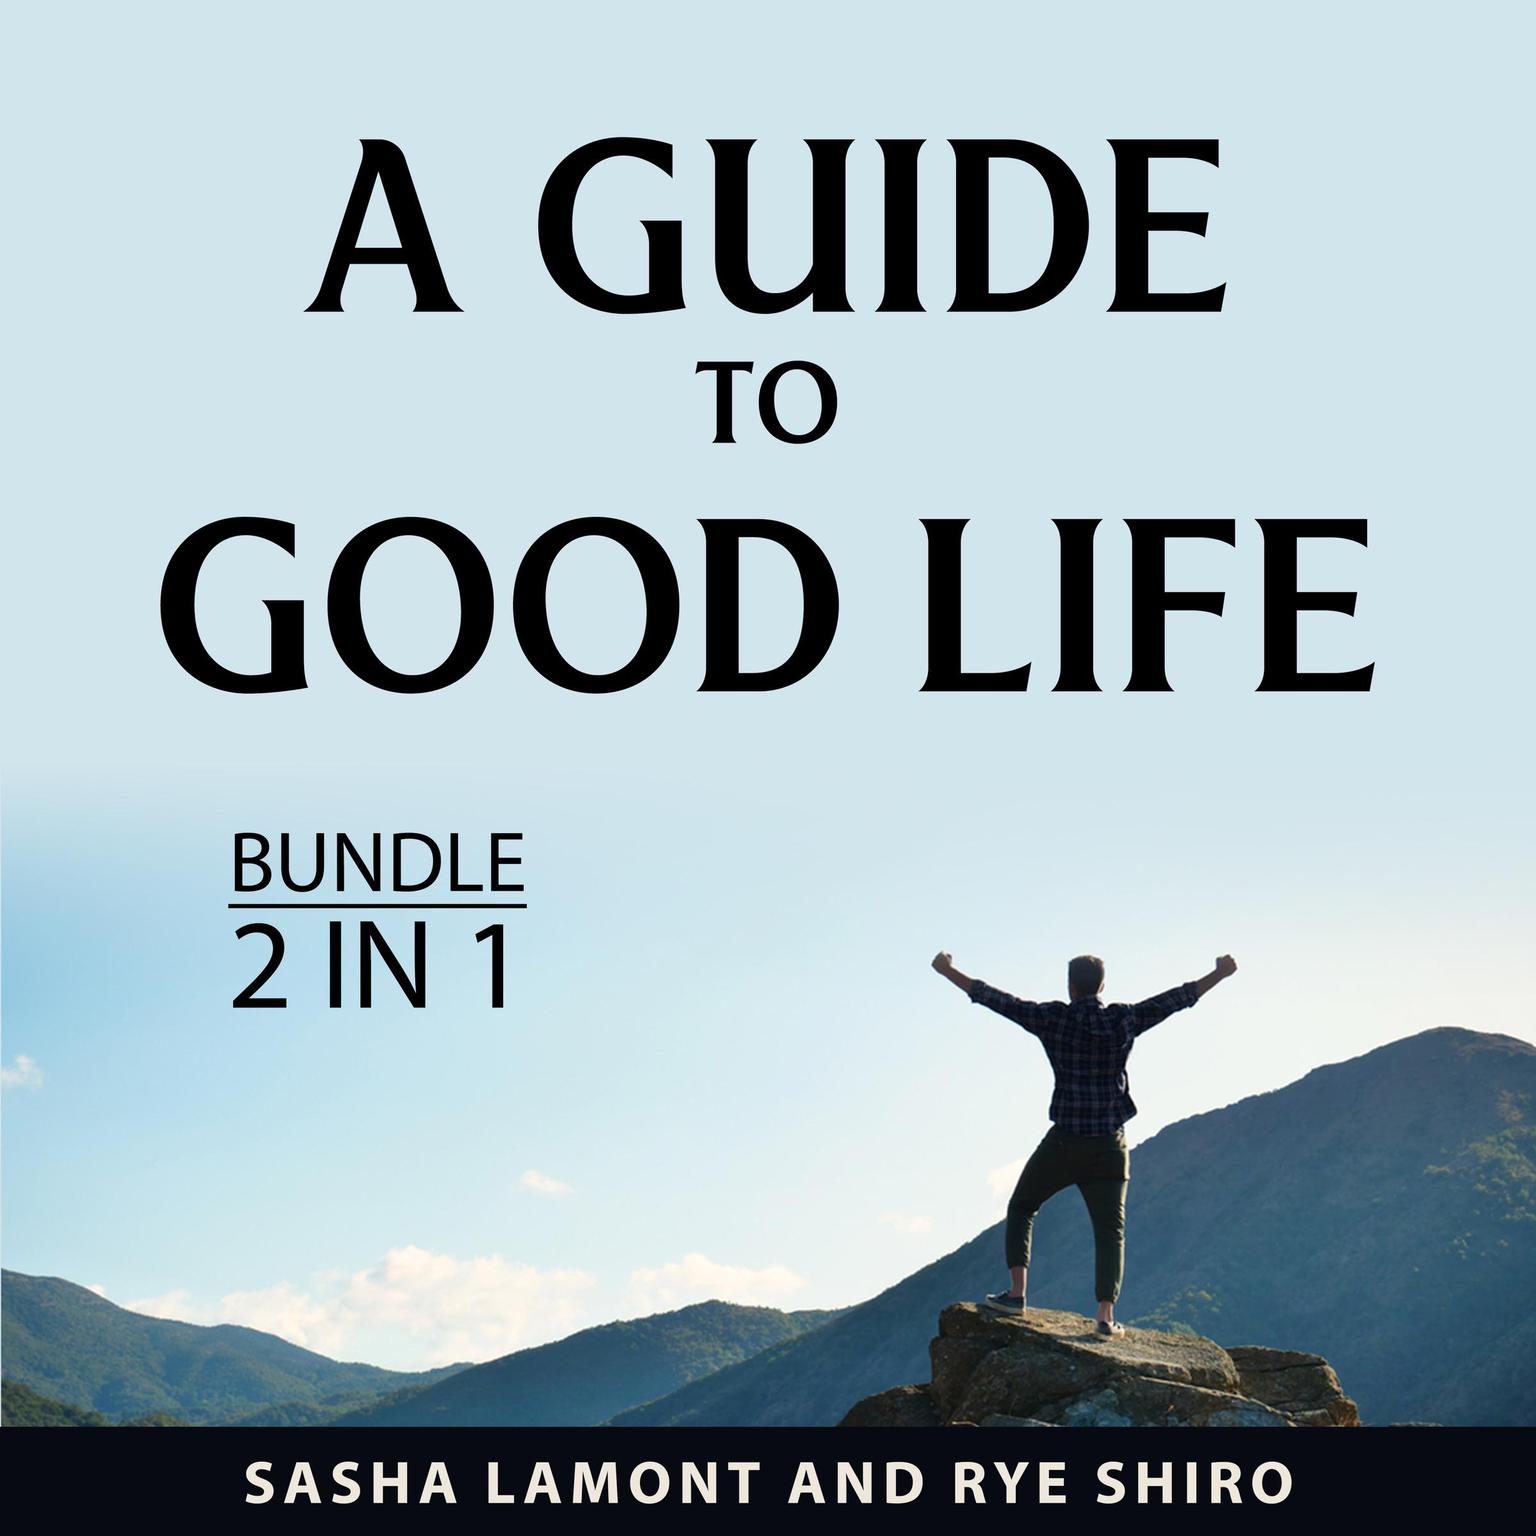 A Guide to Good Life Bundle, 2 in 1 Bundle Audiobook, by Sasha Lamont